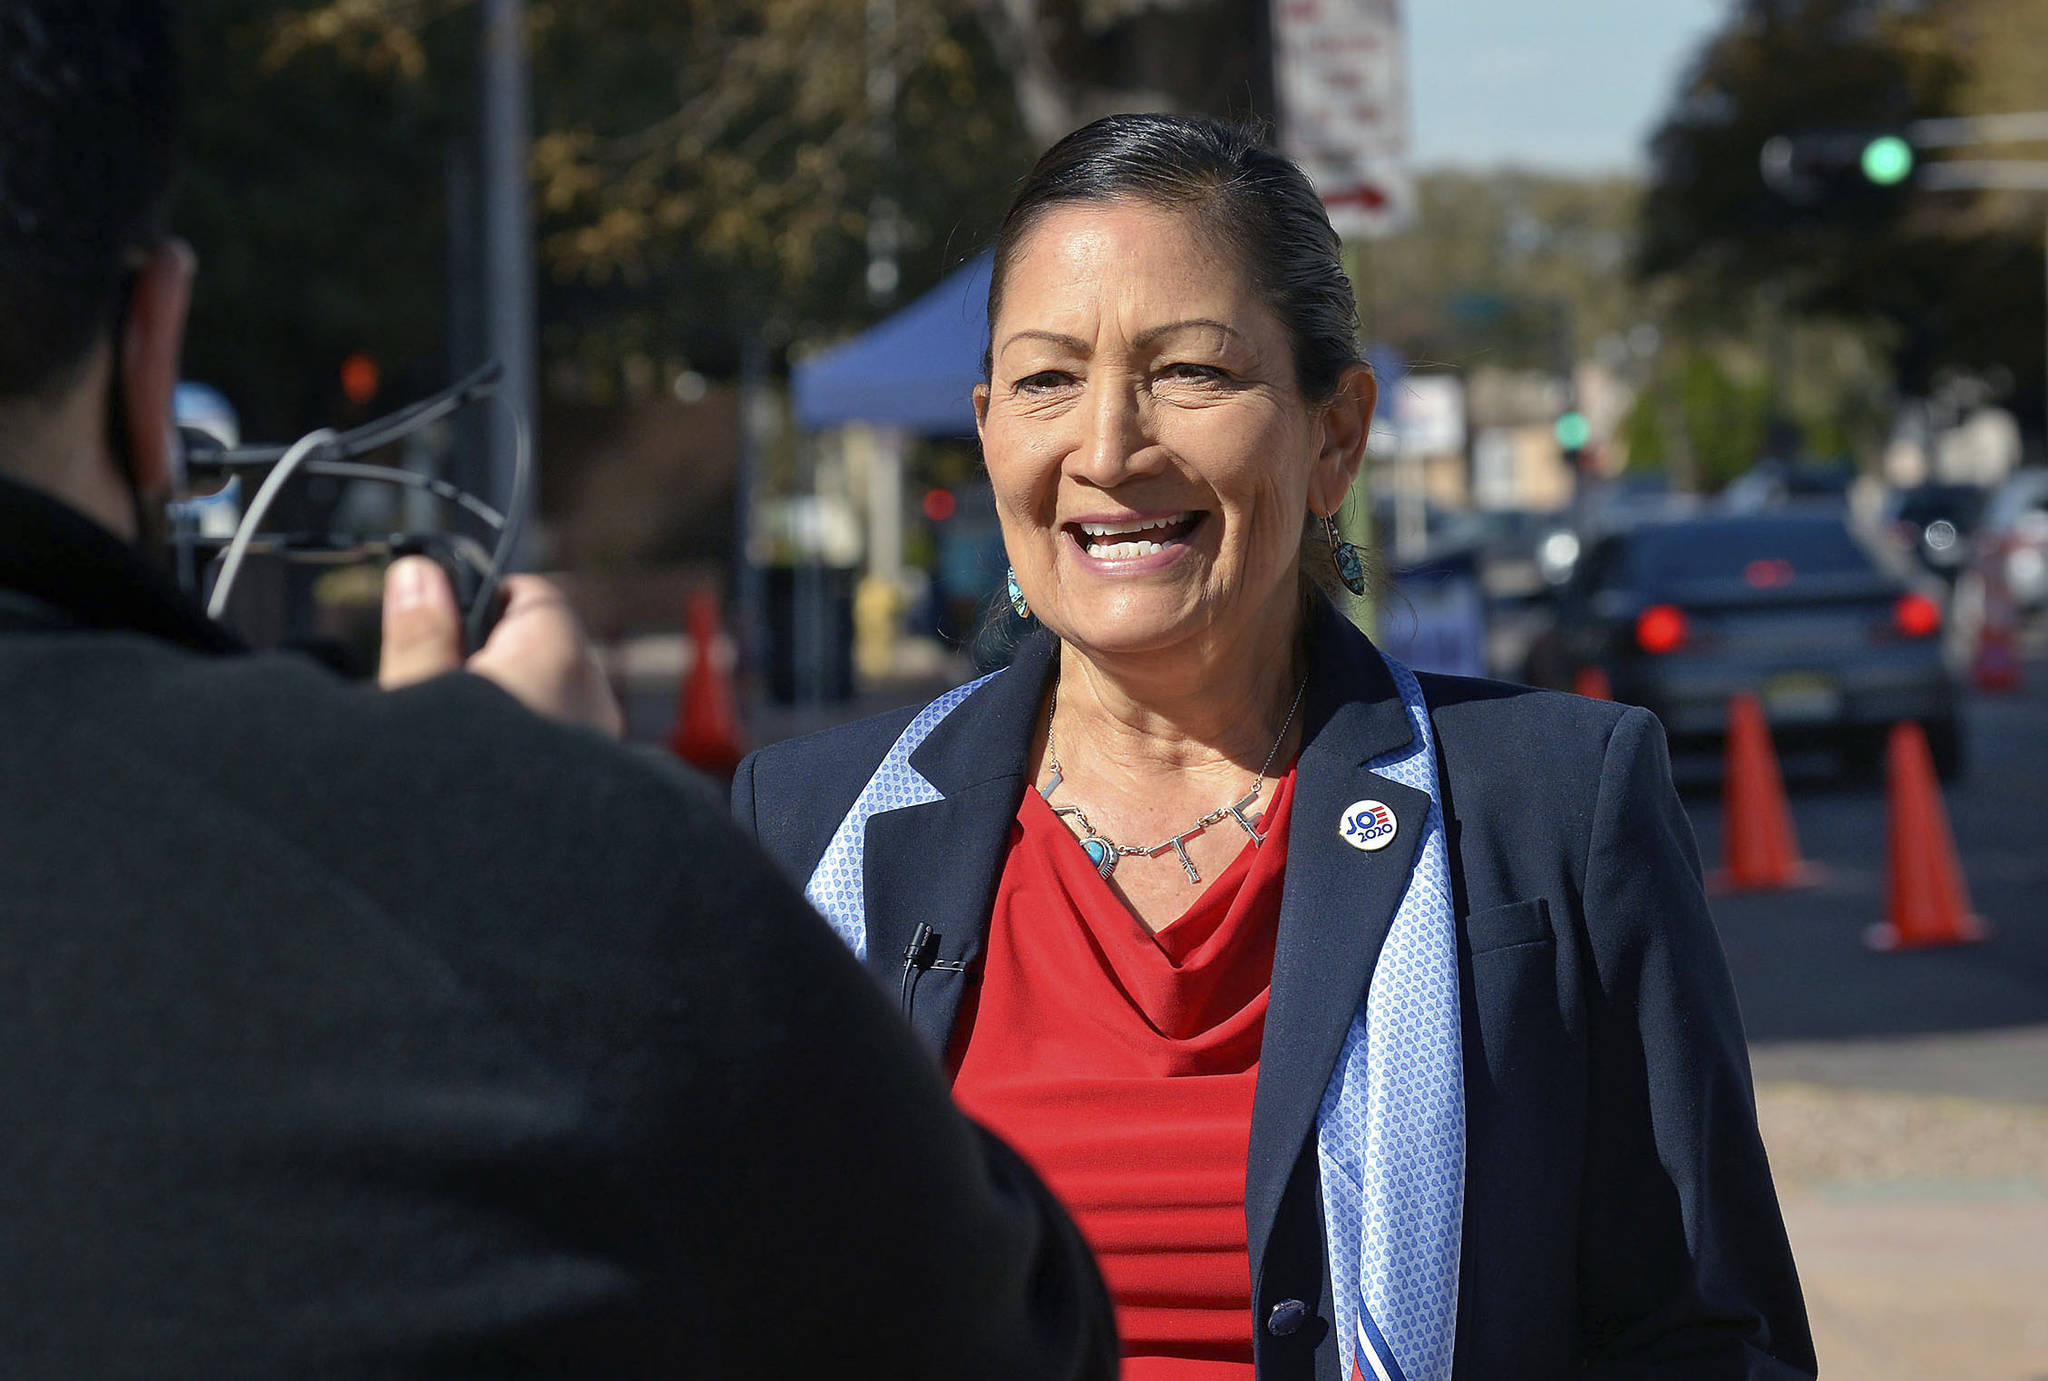 Democratic Congresswoman Deb Haaland, N.M.-1st Dist., does a PSA for her Twitter account in downtown Albuquerque, N.M. Internet access, health care and basic necessities like running water and electricity within Indigenous communities have long been at the center of congressional debates. But until recently, Congress didn’t have many Indigenous members who were pushing for solutions and funding for those issues. Hope is growing after the Native delegation in the U.S. House expanded by two on Election Day joining four others that were reelected. (Jim Thompson / The Albuquerque Journal)